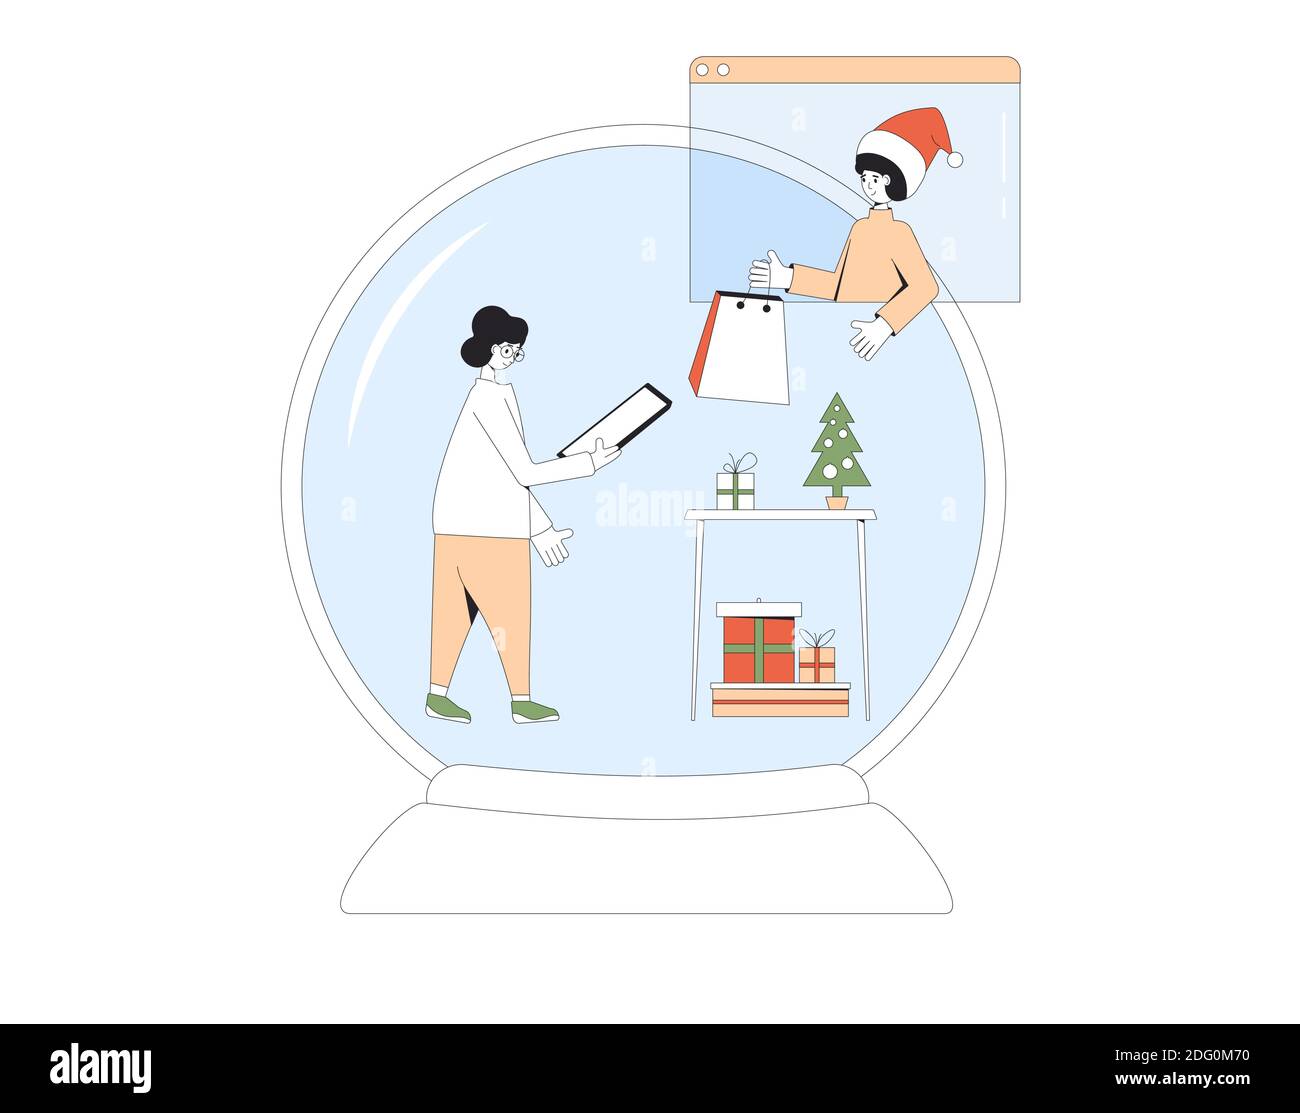 Christmas online meeting. Family giving a gift. Stay home at holiday. Young person meeting with her mom with video call during a pandemic. Sharing vir Stock Vector